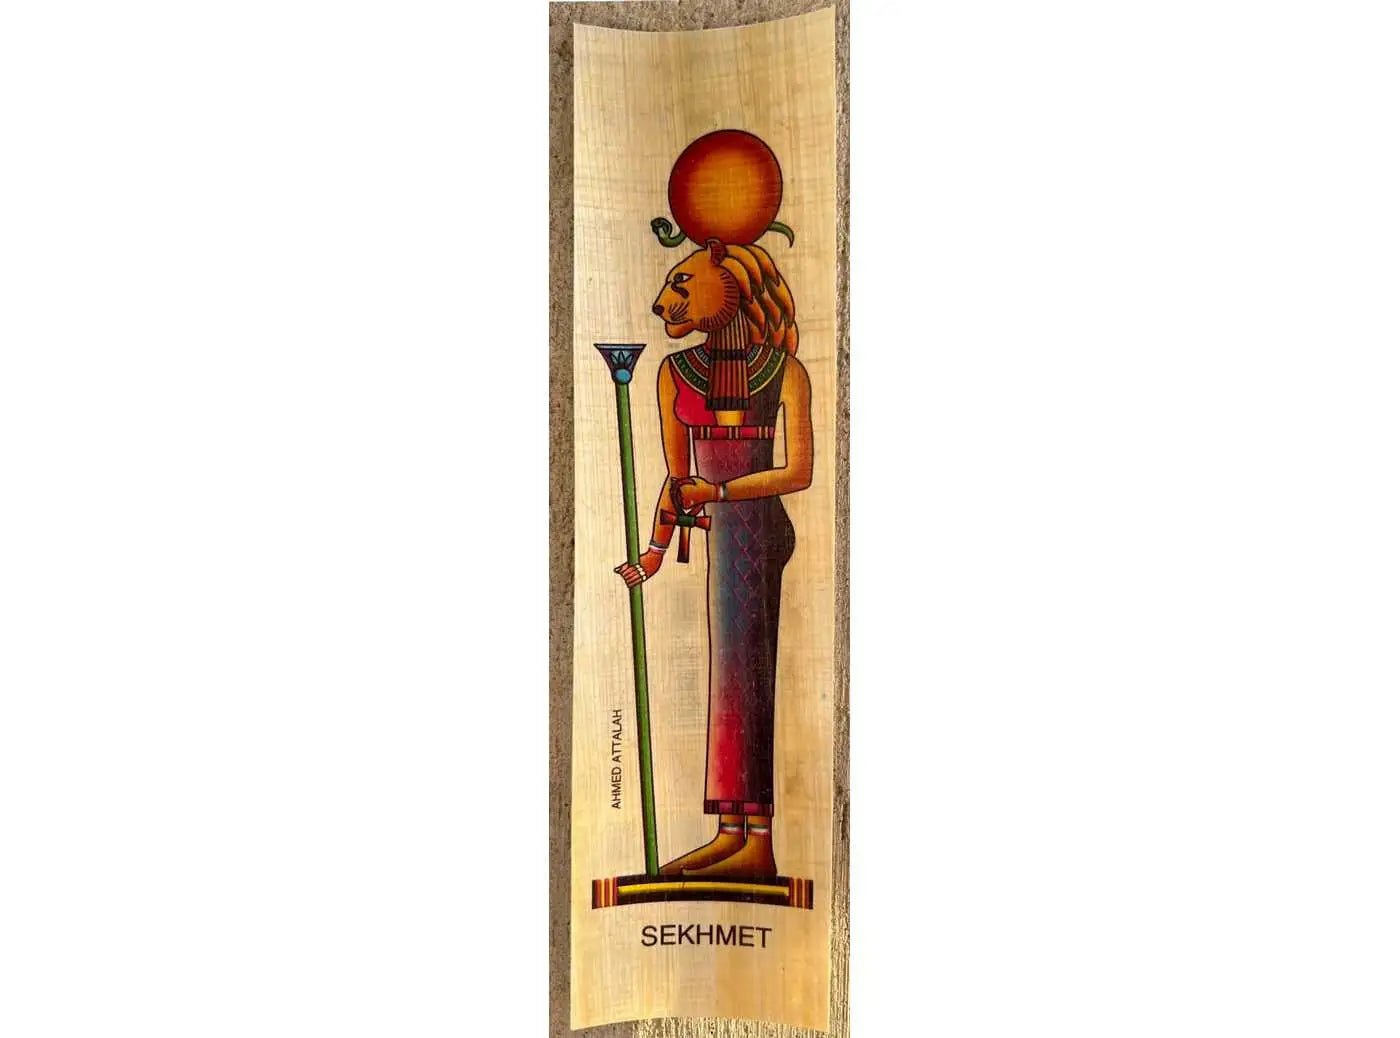 Sekhmet Bookmark - The War Goddess of Ancient Egypt - Papyrus Bookmarks - Sekmet the Bloodthirsty